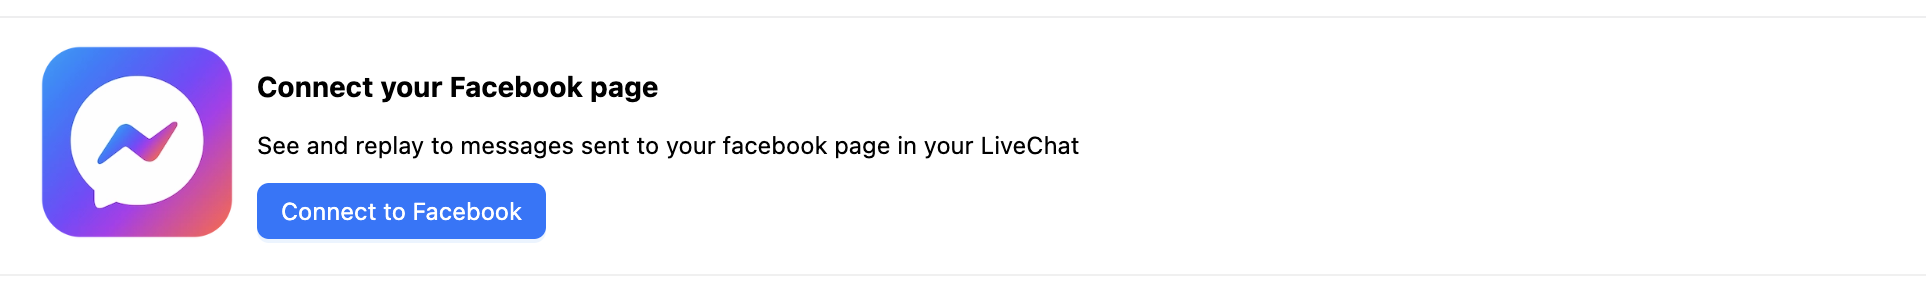 Messenger for LiveChat connect